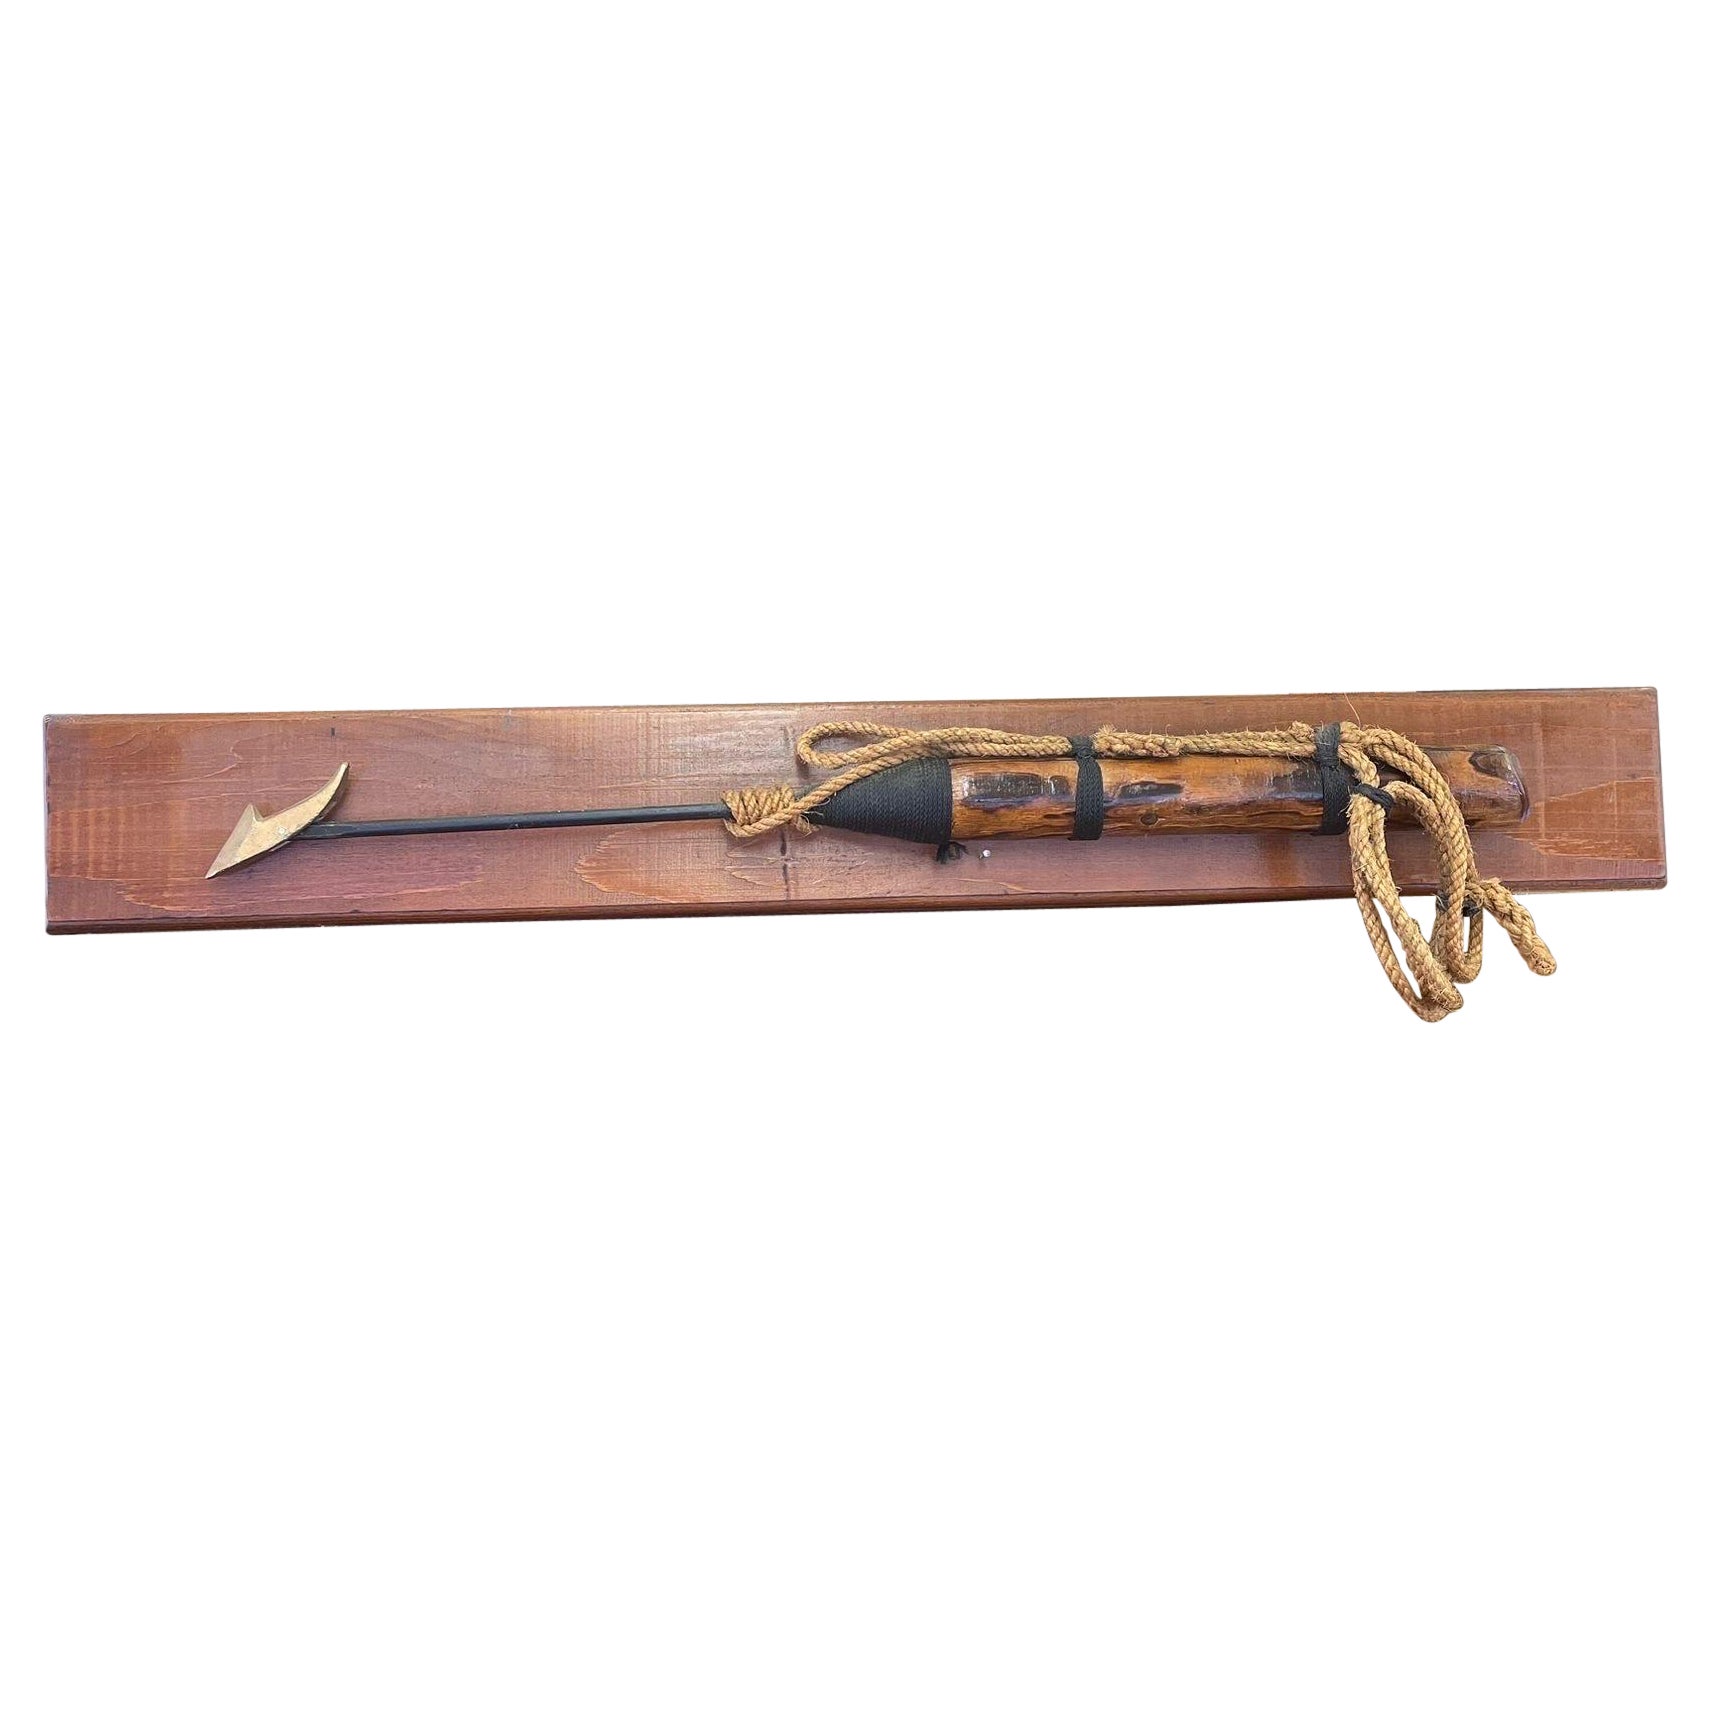 Vintage Whaling Harpoon Decorative Reproduction on Wood Backing.